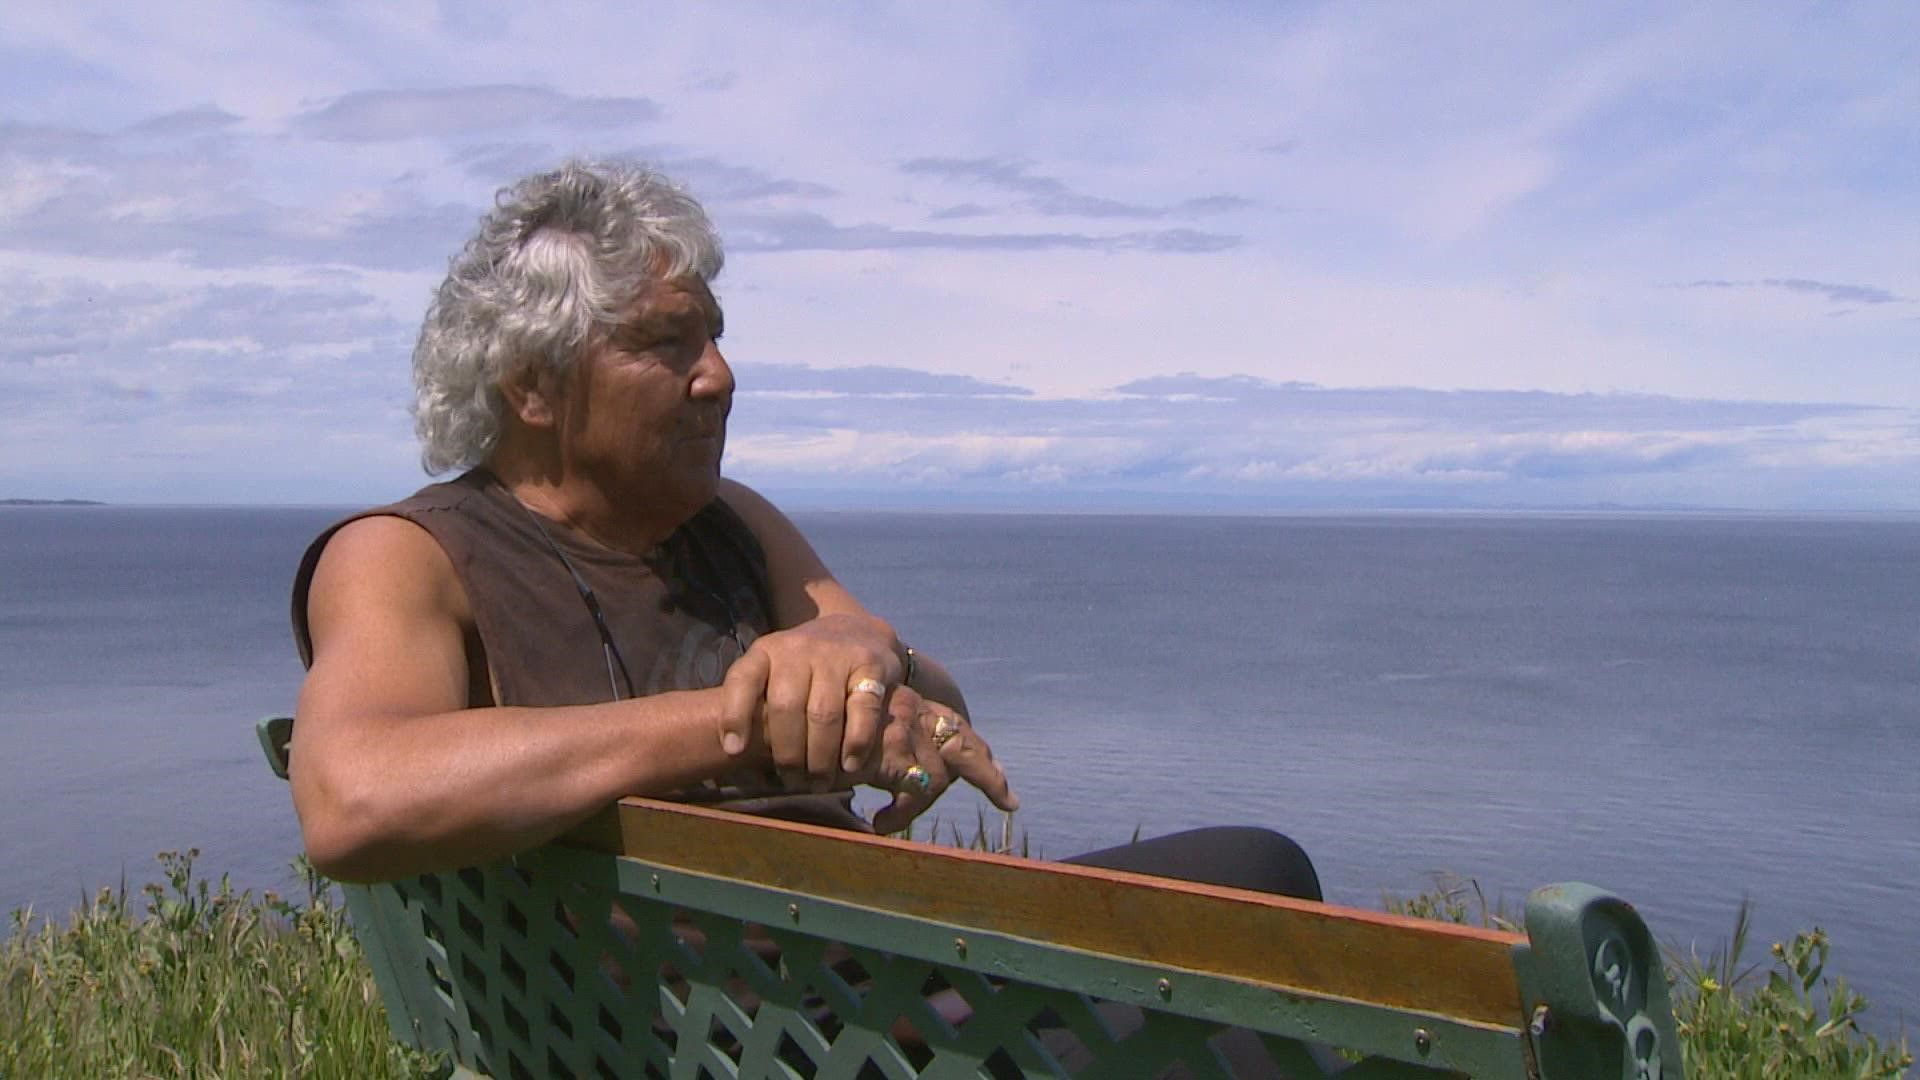 Marty Bluewater has spent more than 50 years on a remote Northwest island.